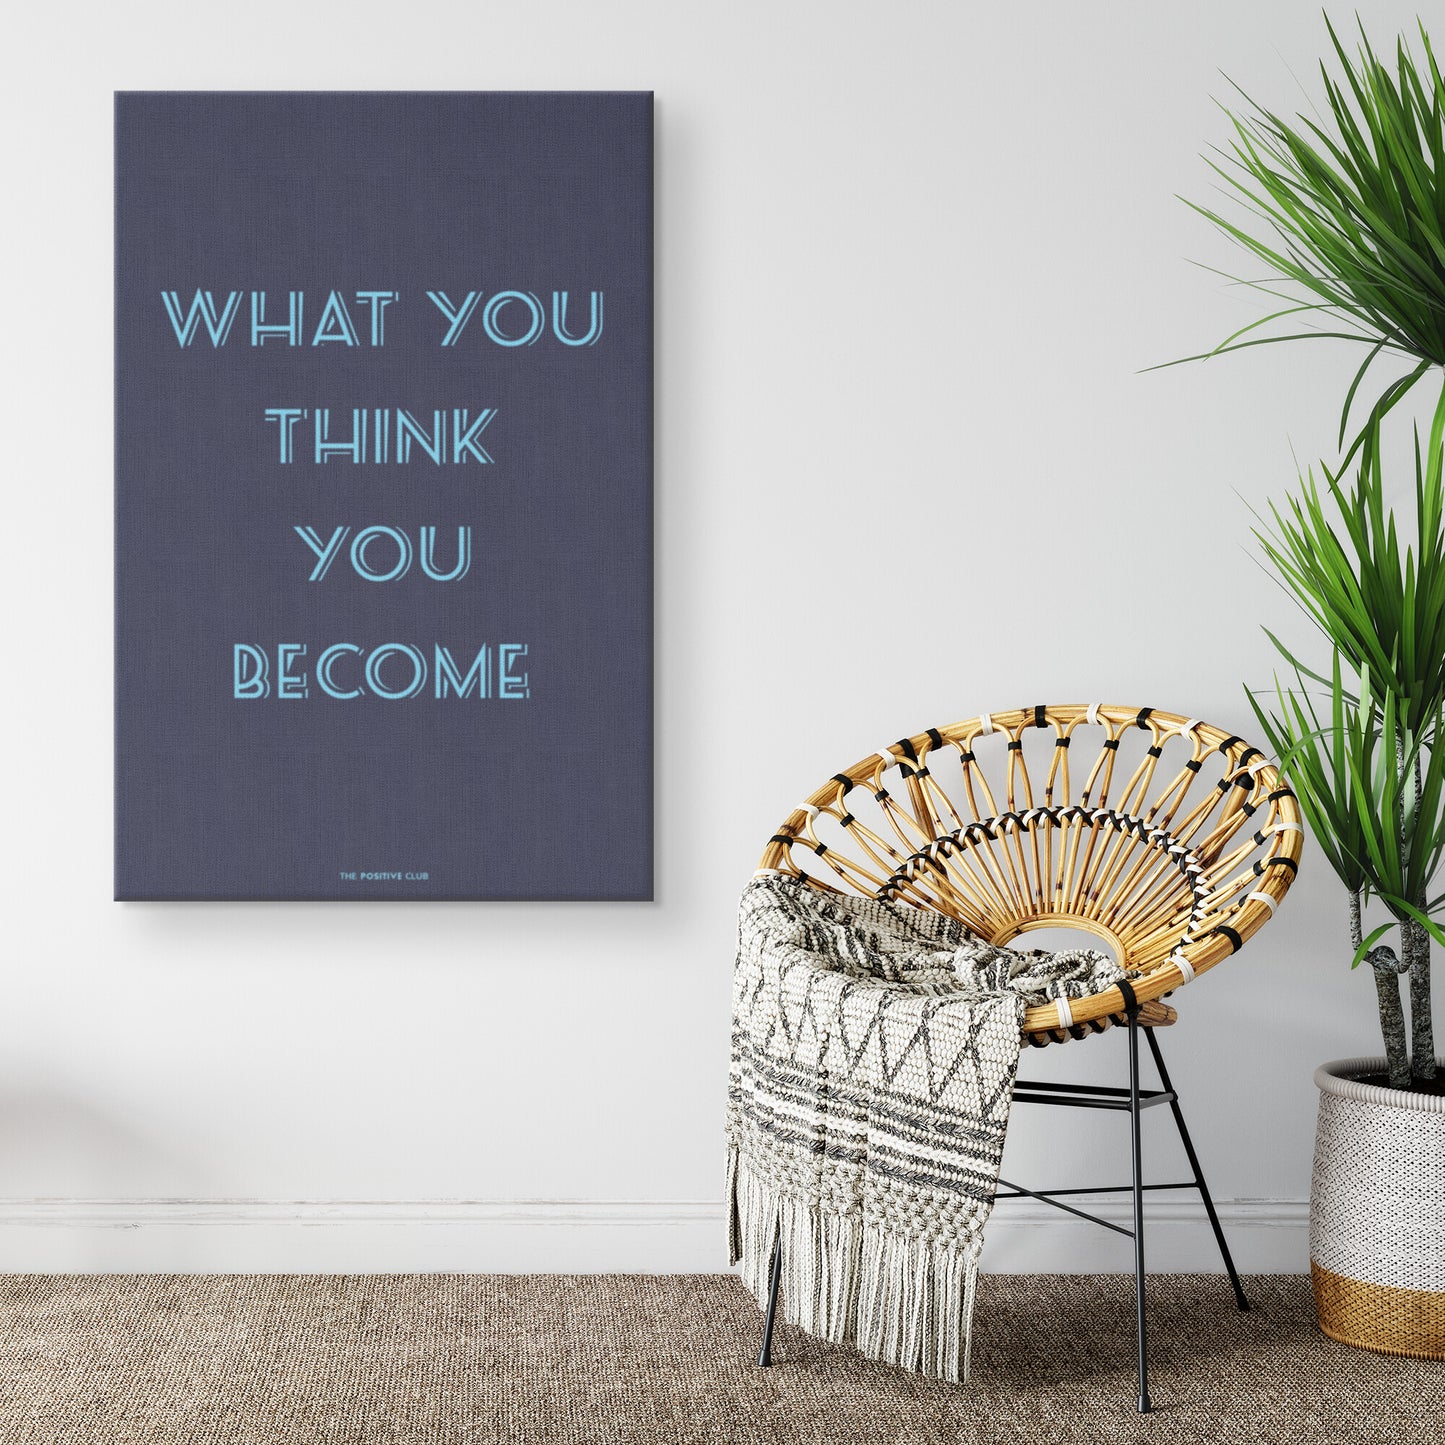 WHAT YOU THINK YOU BECOME